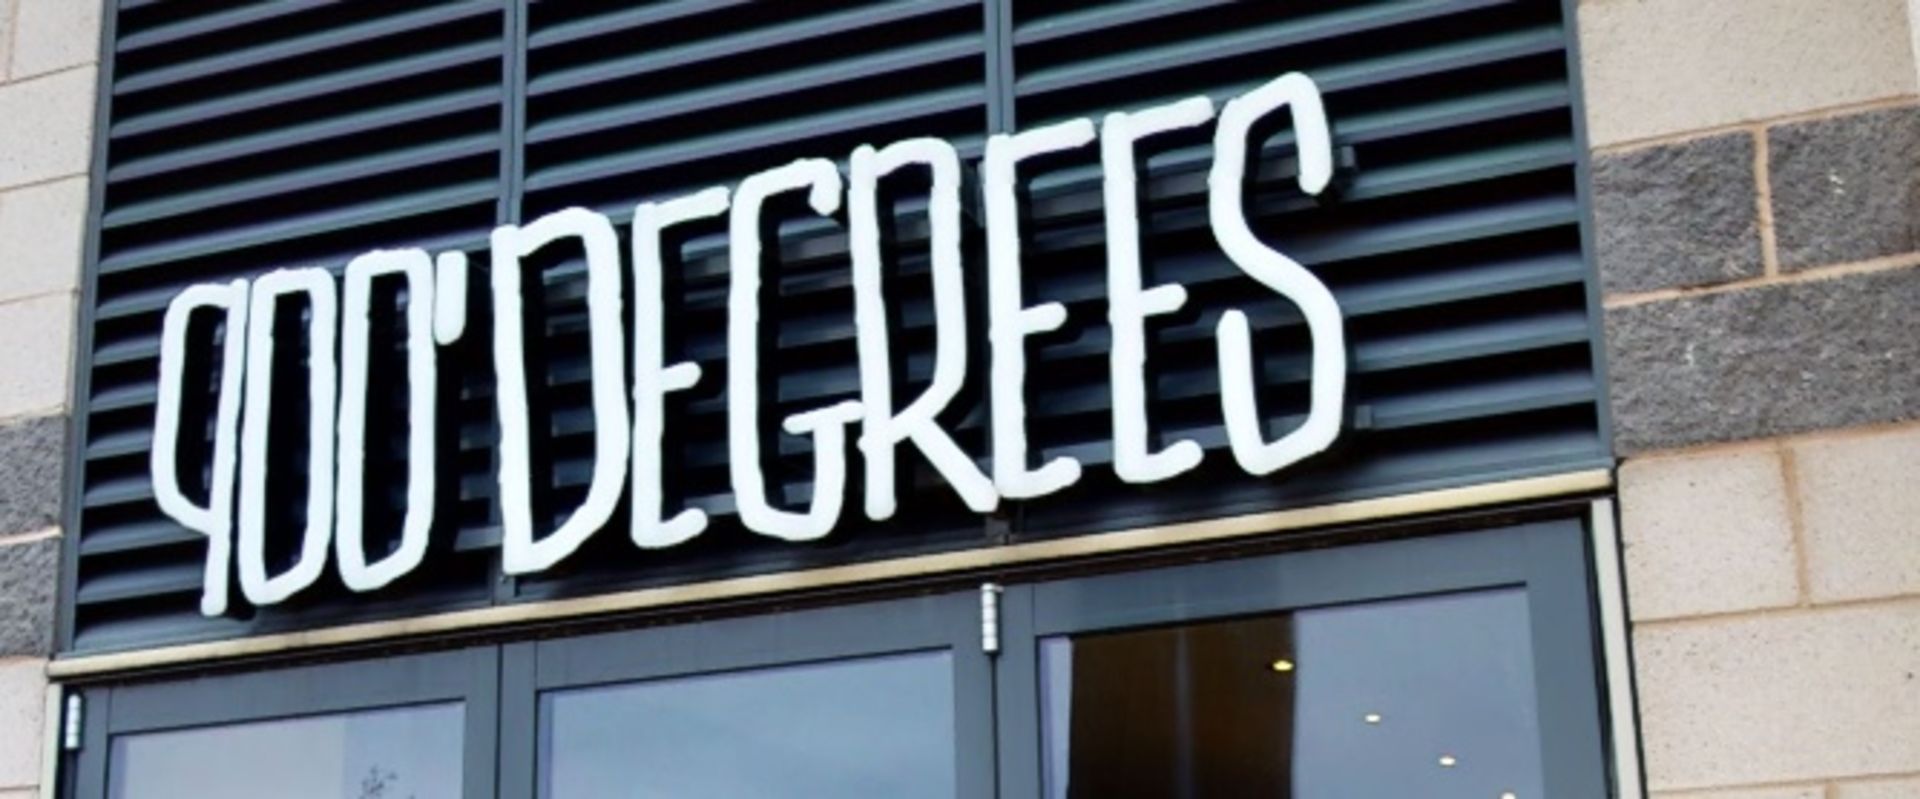 1 x Commercial Signage Featuring 900' DEGREES Branding in Large Illuminated Letters - Includes - Image 4 of 6